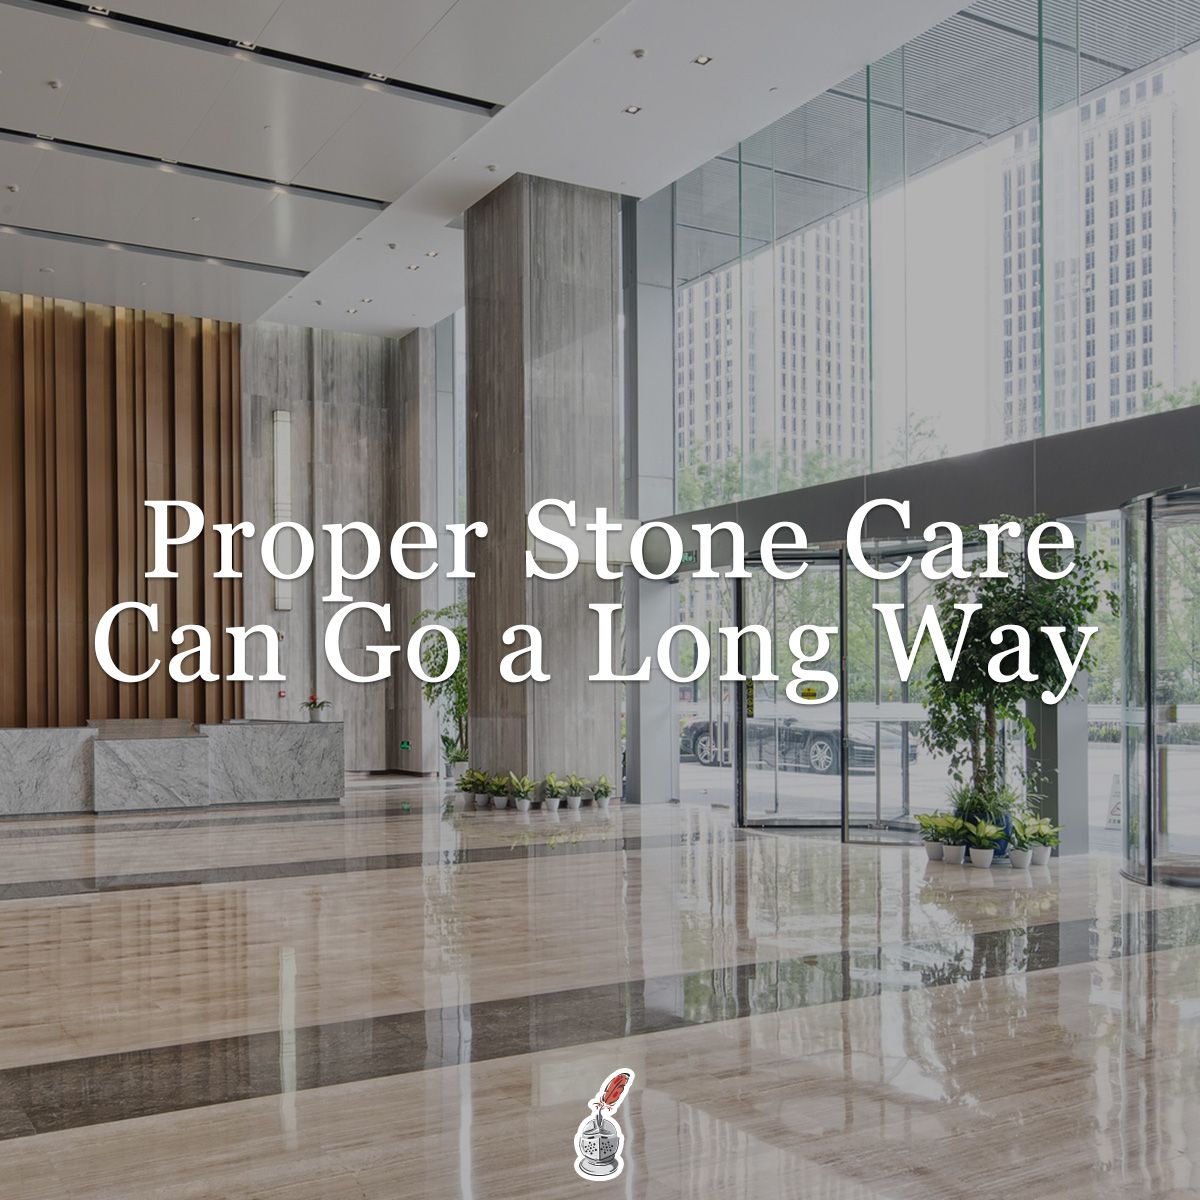 Proper Stone Care Can Go a Long Way